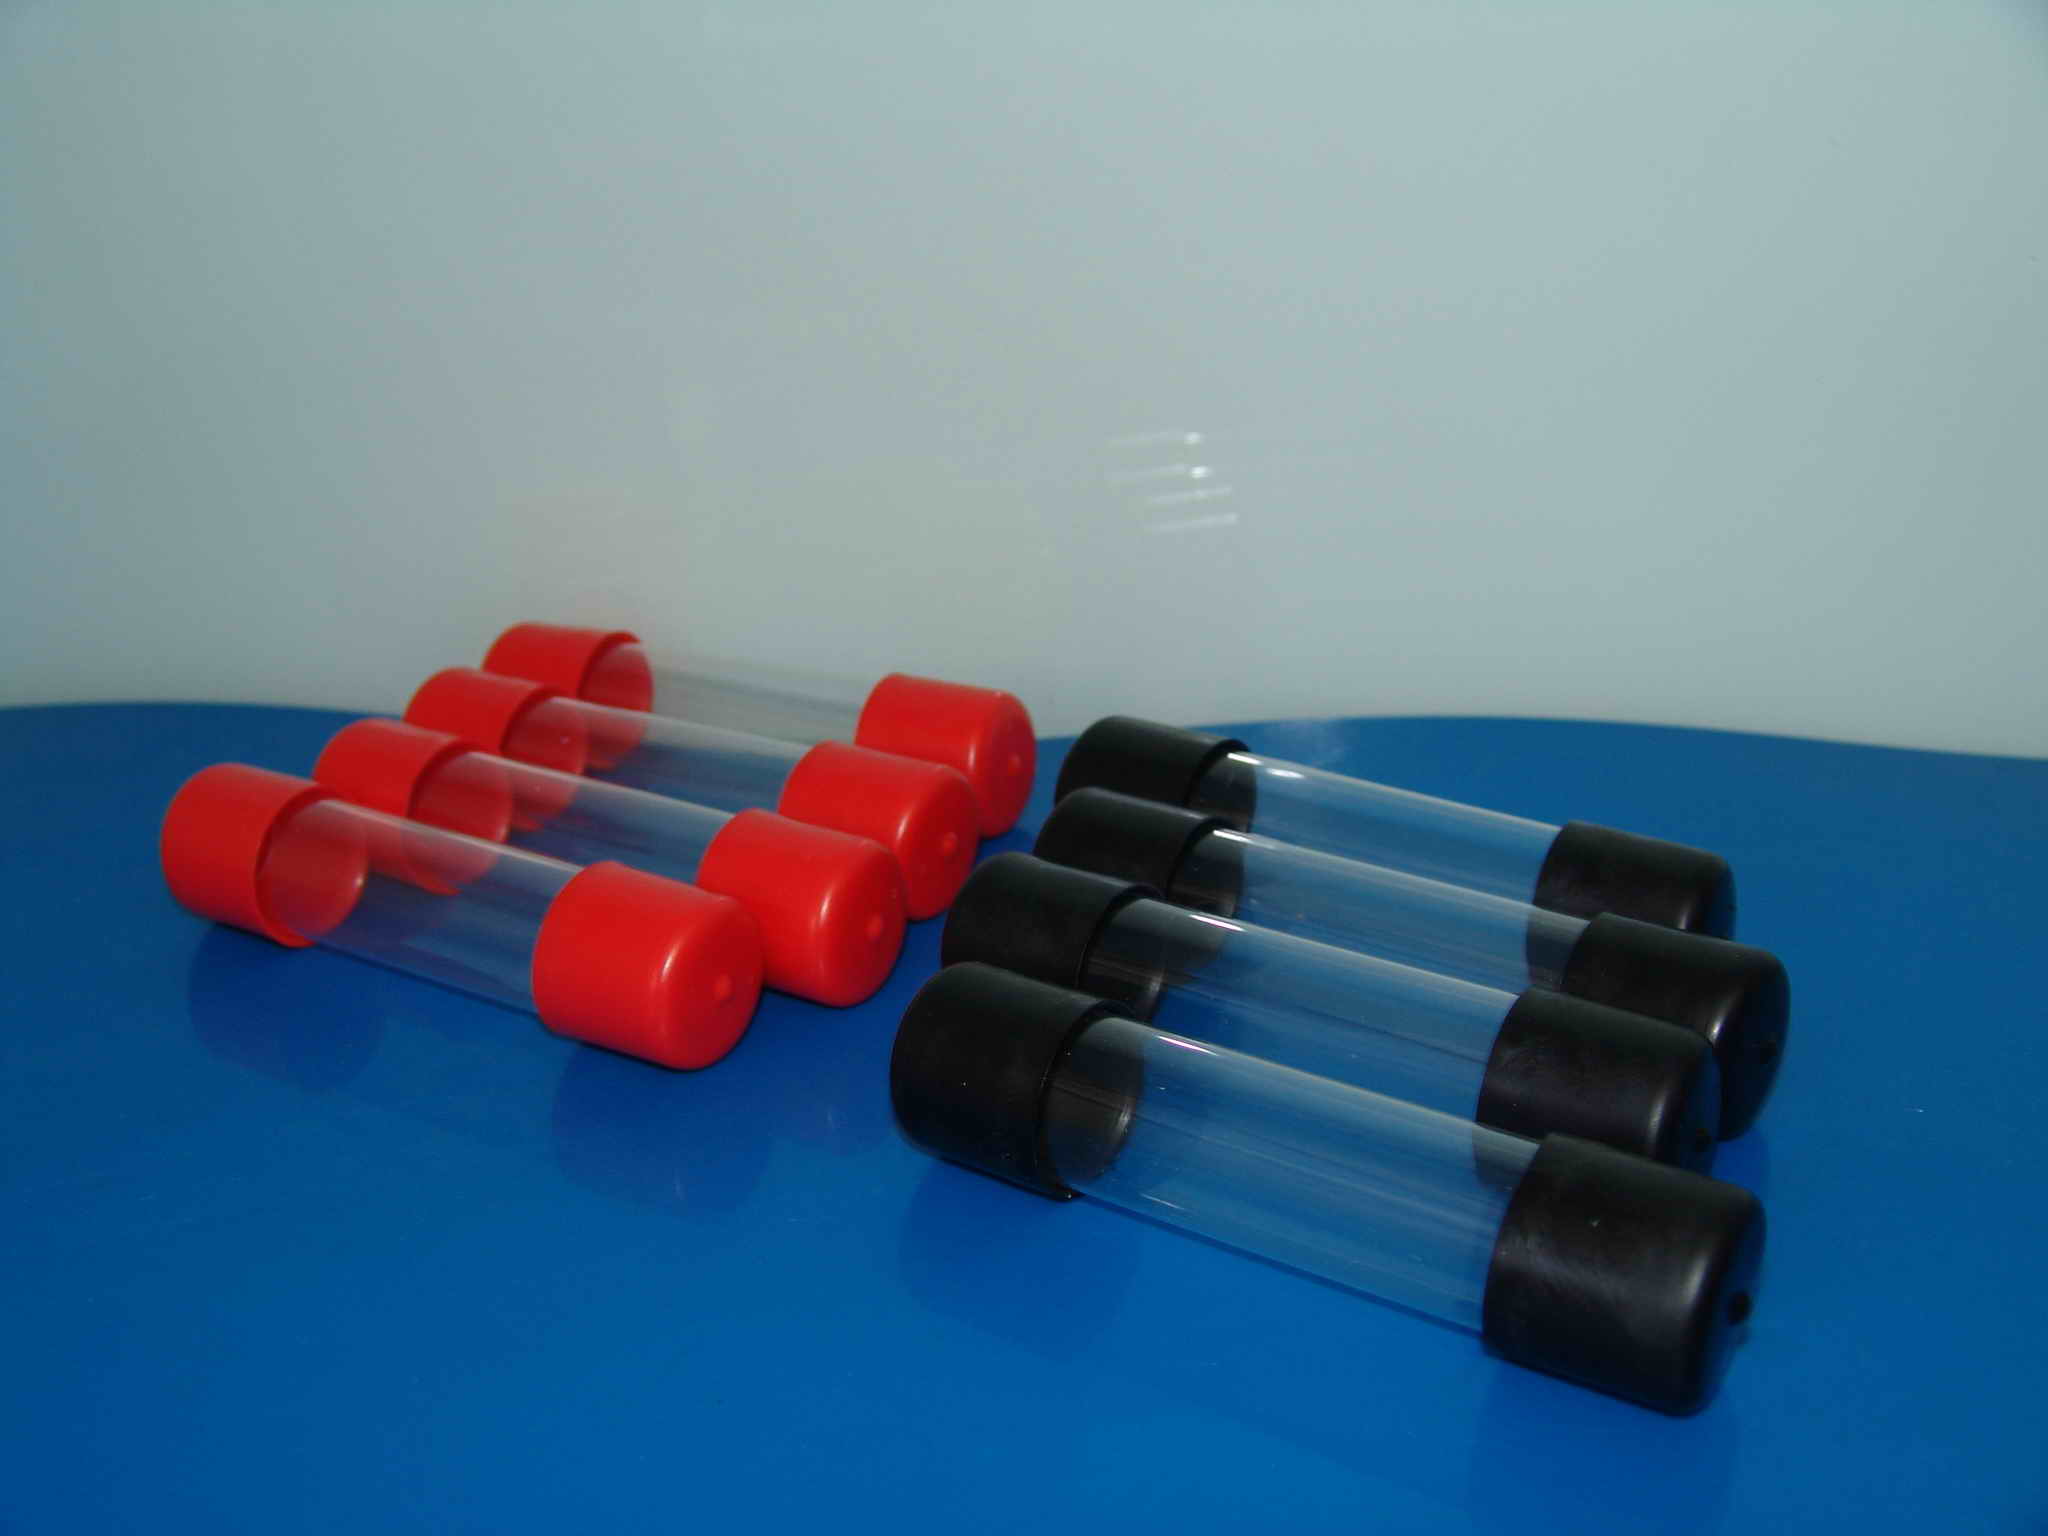 Cleartec Plastic Tubes for Use as Poster Tubes or Hanging Product Displays